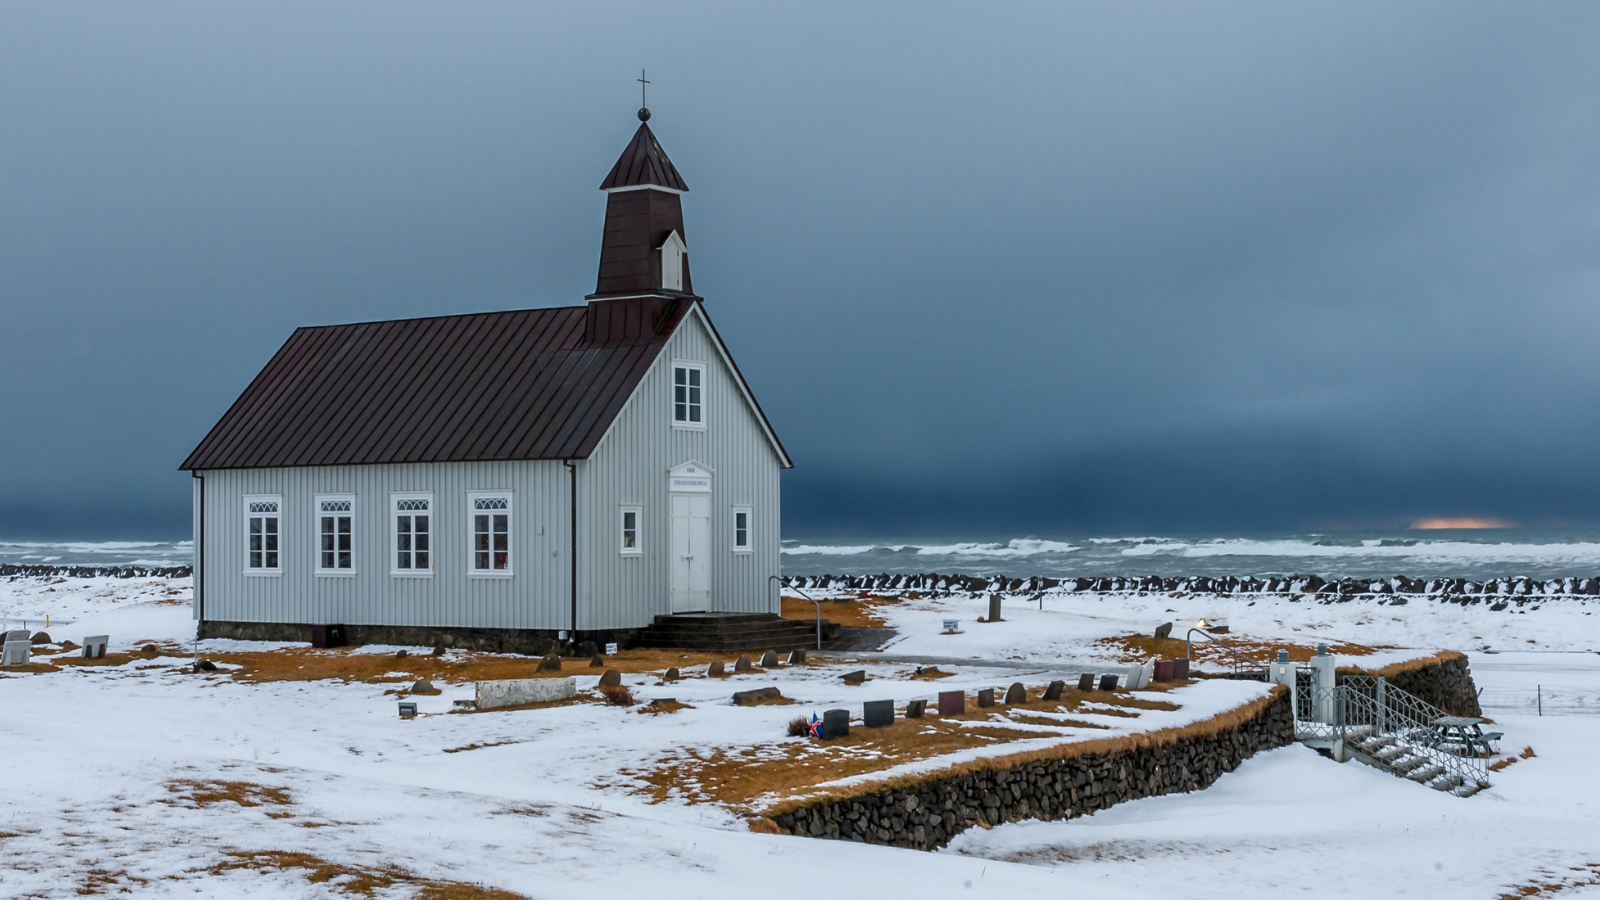 Strandarkirkja church in Iceland, home to famous sculpture ‘Land in Sight’